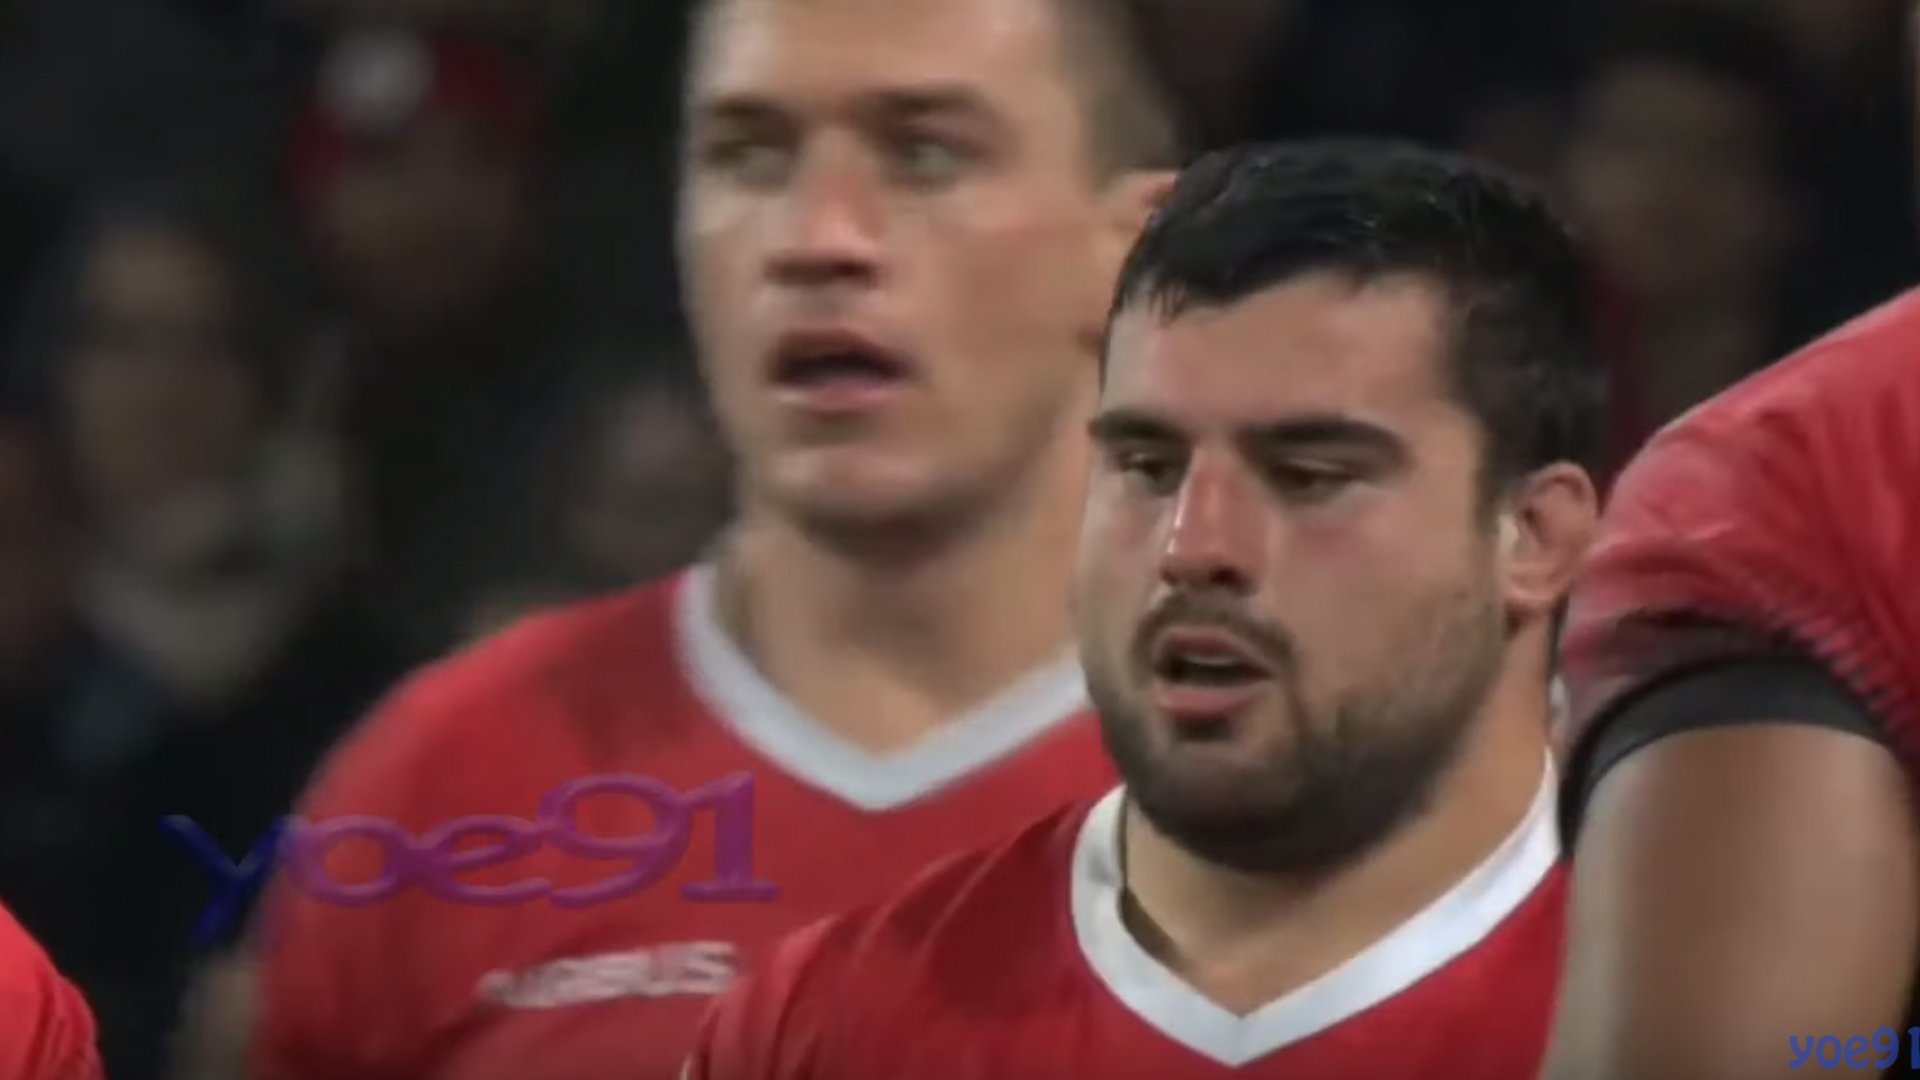 The nightmare loosehead prop that all of Europe is now talking about